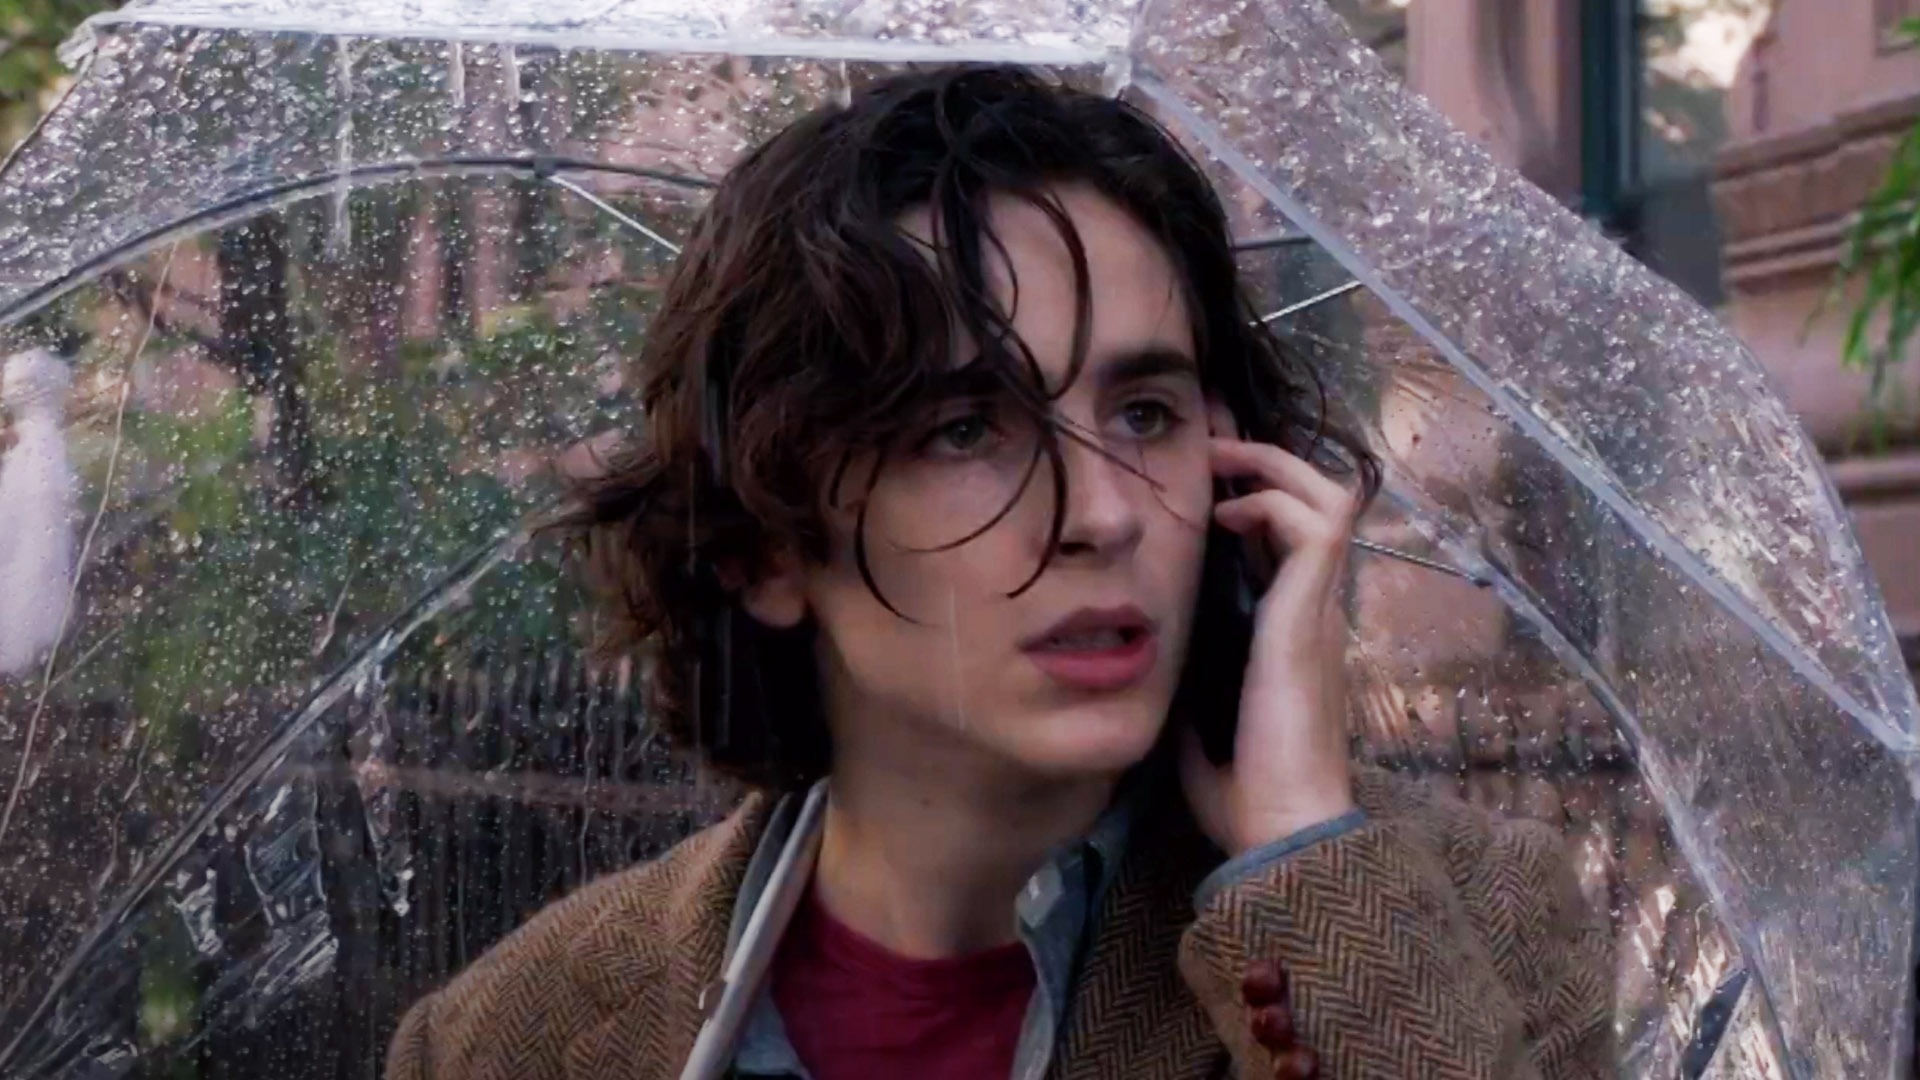 Prime Video: A Rainy Day in New York